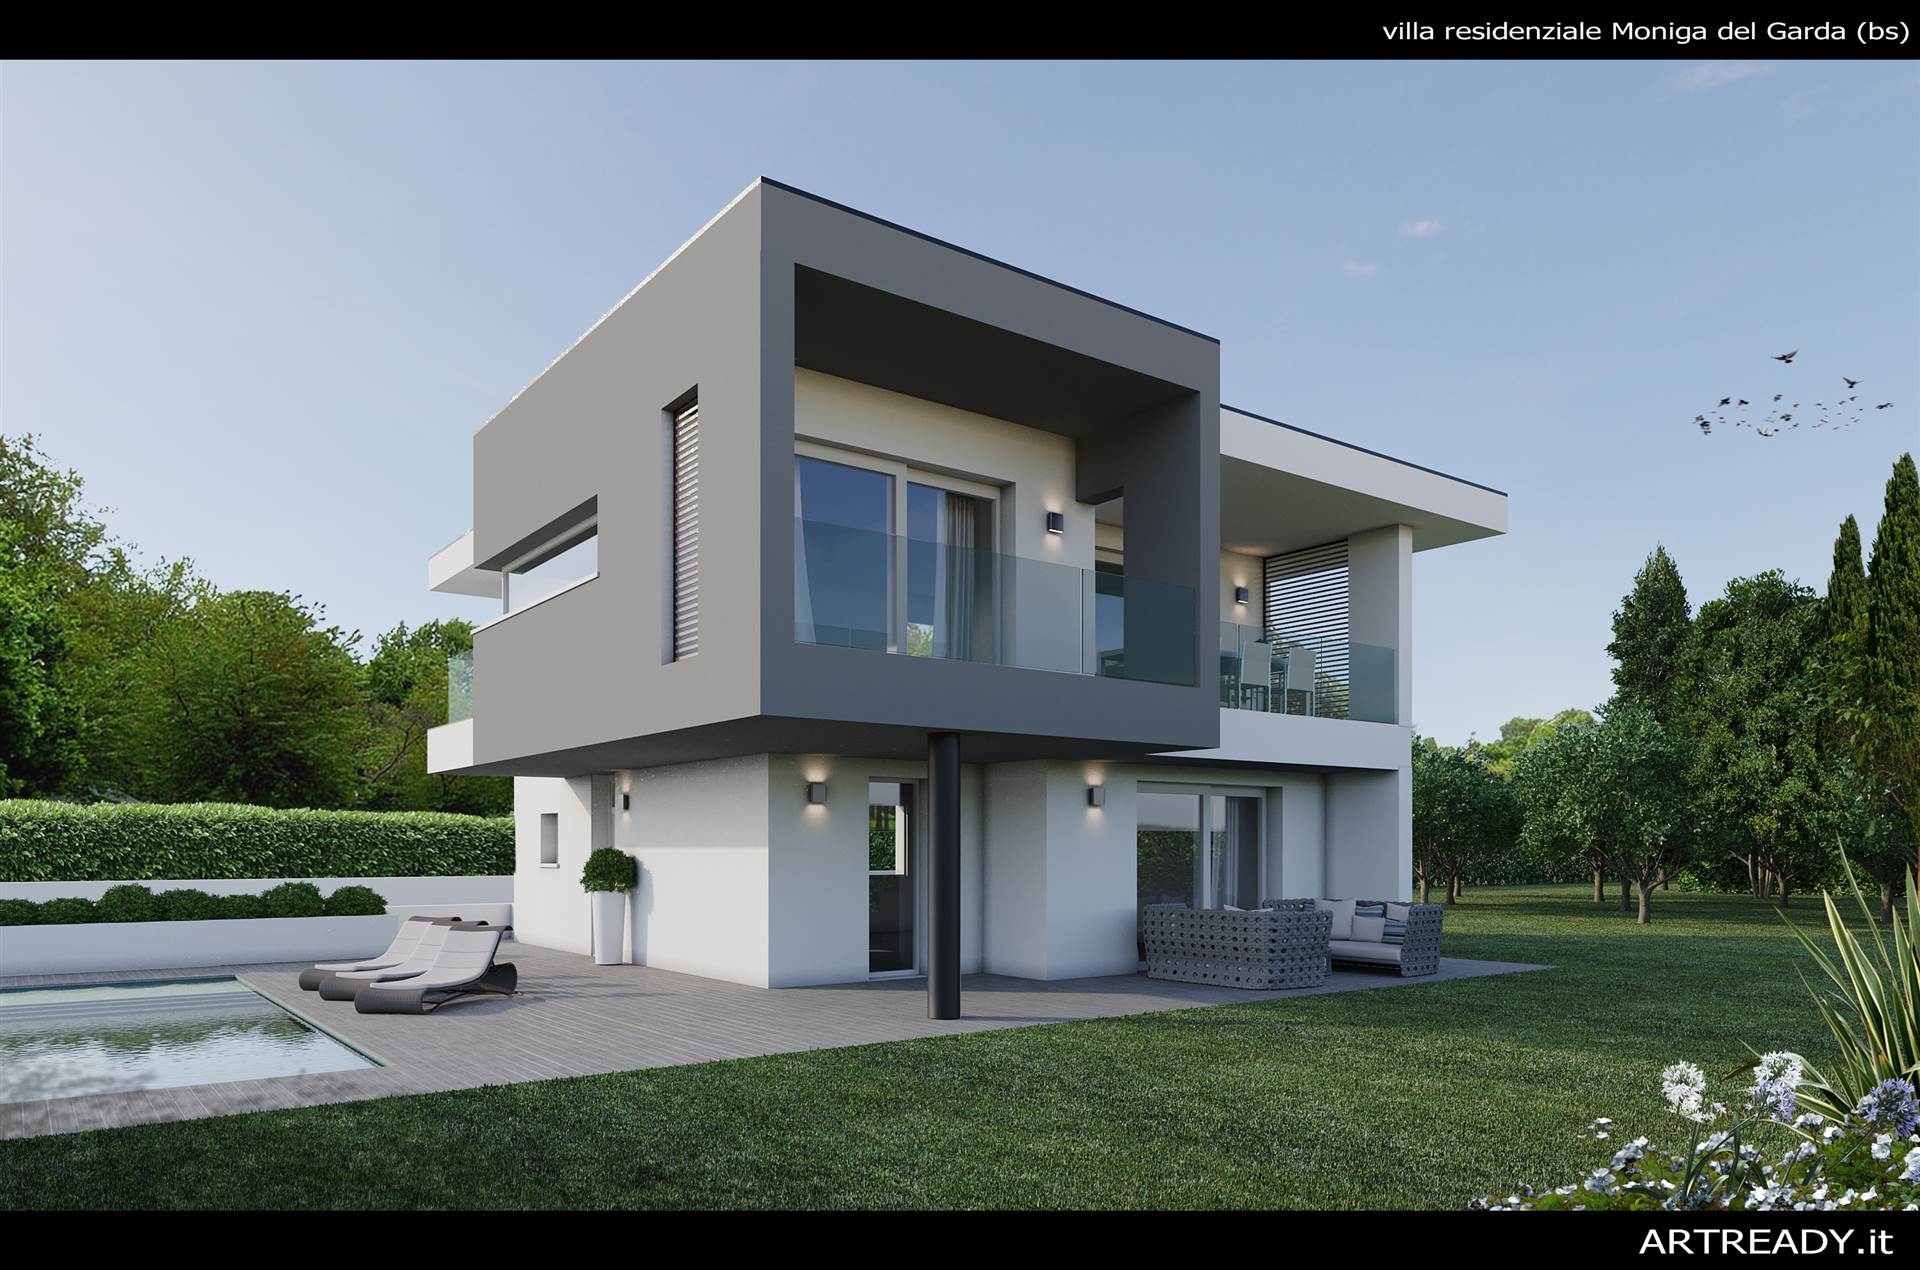 MONIGA DEL GARDA, Villa for sale of 120 Sq. mt., New construction, Heating Individual heating system, Energetic class: Not subject, composed by: 6 